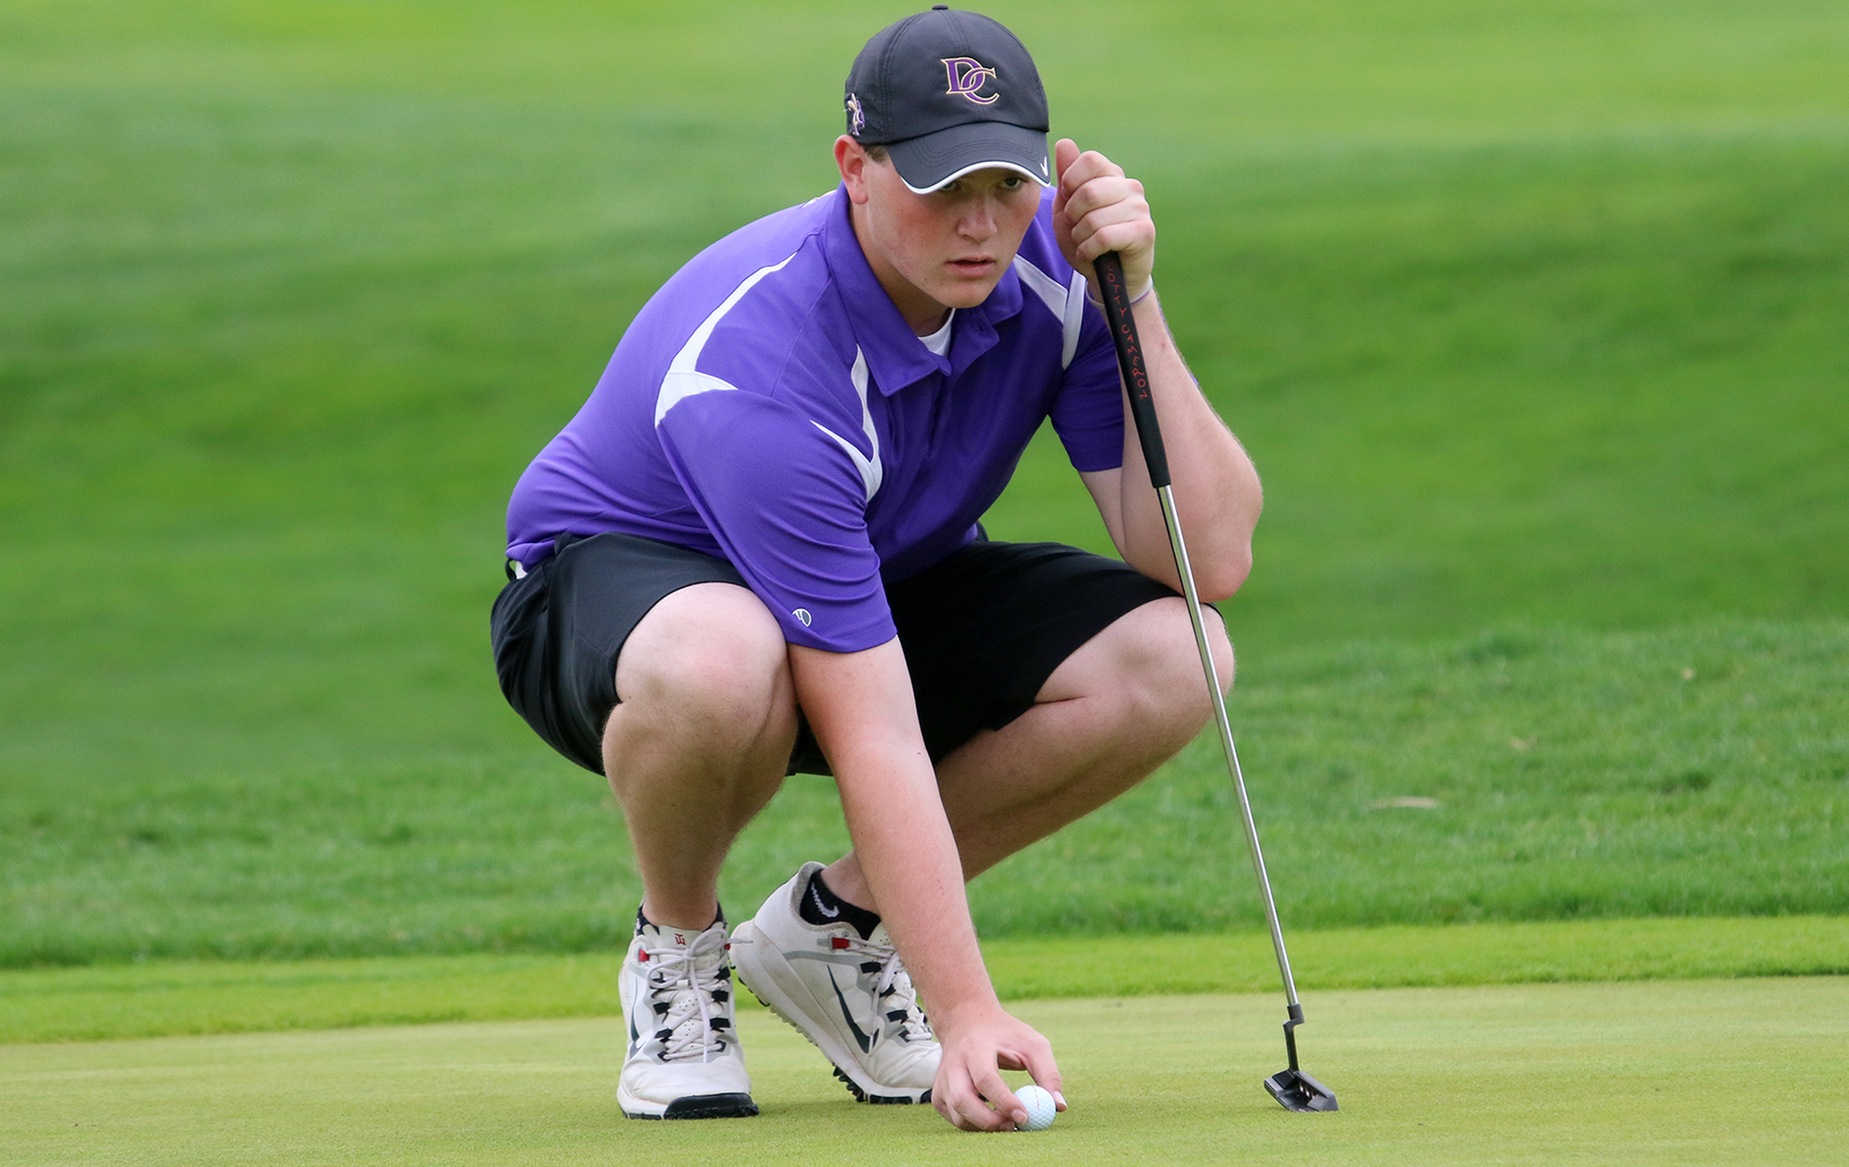 Miday Places in Tie for Second at Anderson (Ind.) Invite